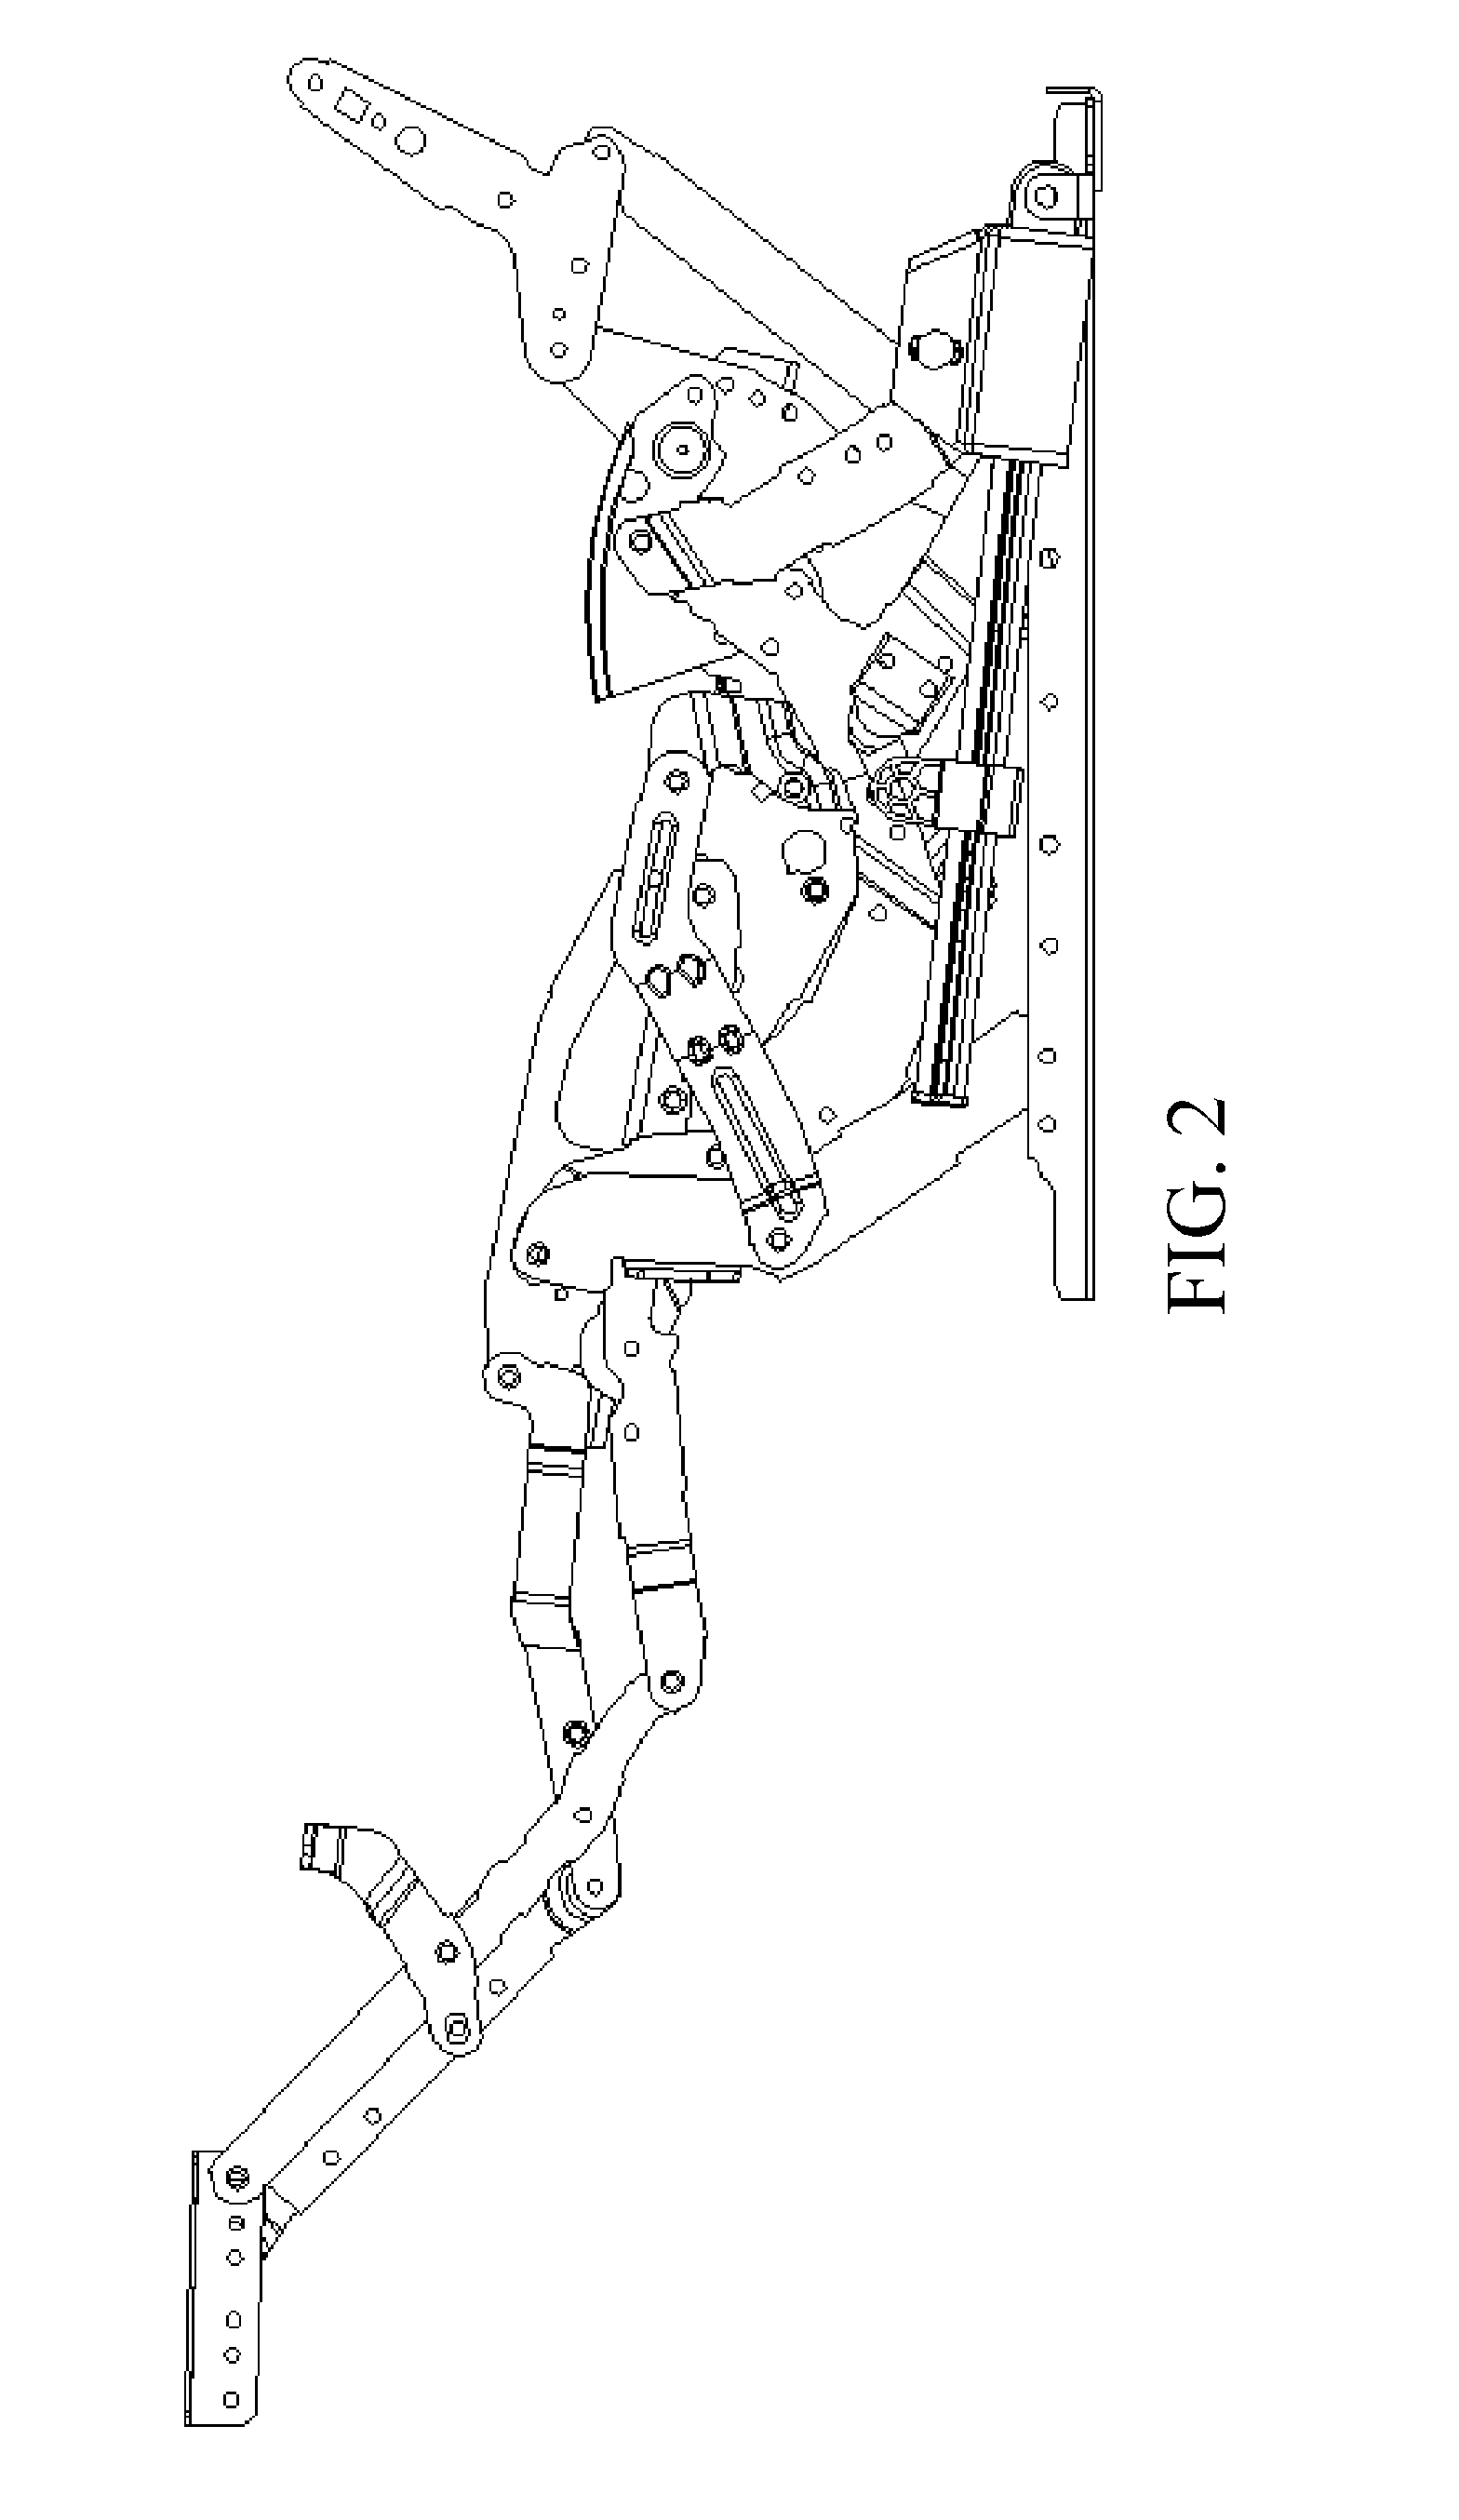 Electric and mechanical stretching apparatus for movable sofa